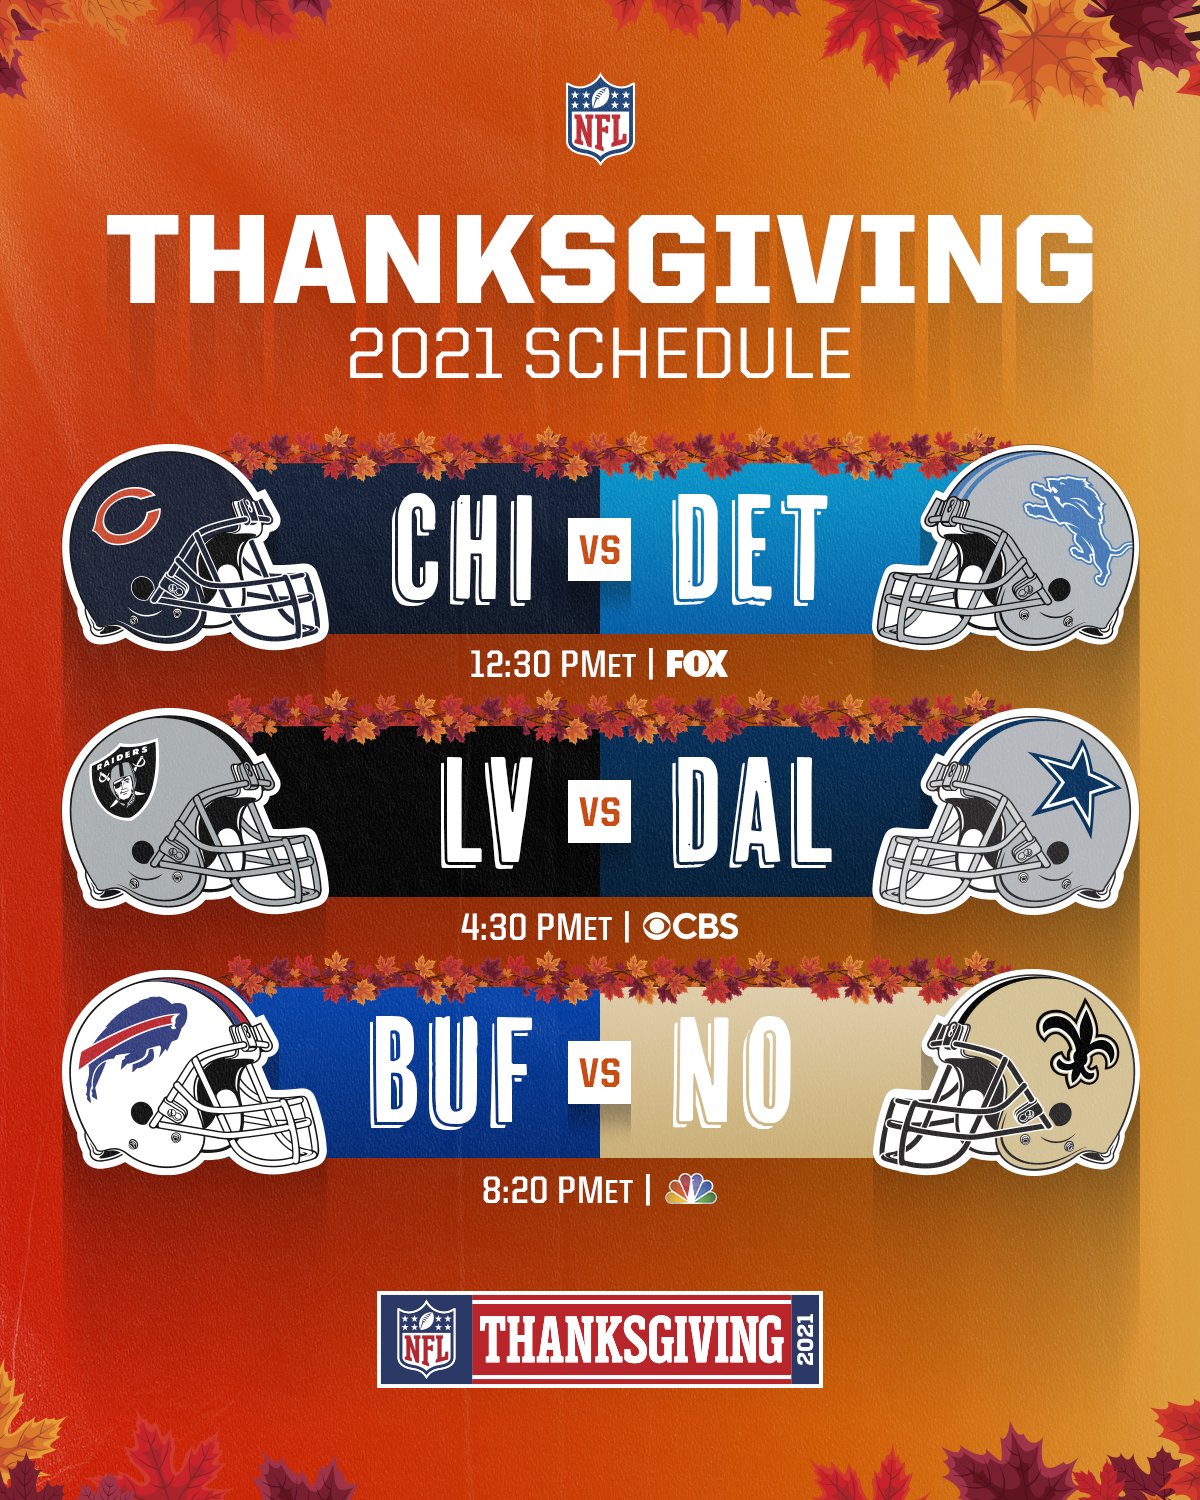 football games today thanksgiving